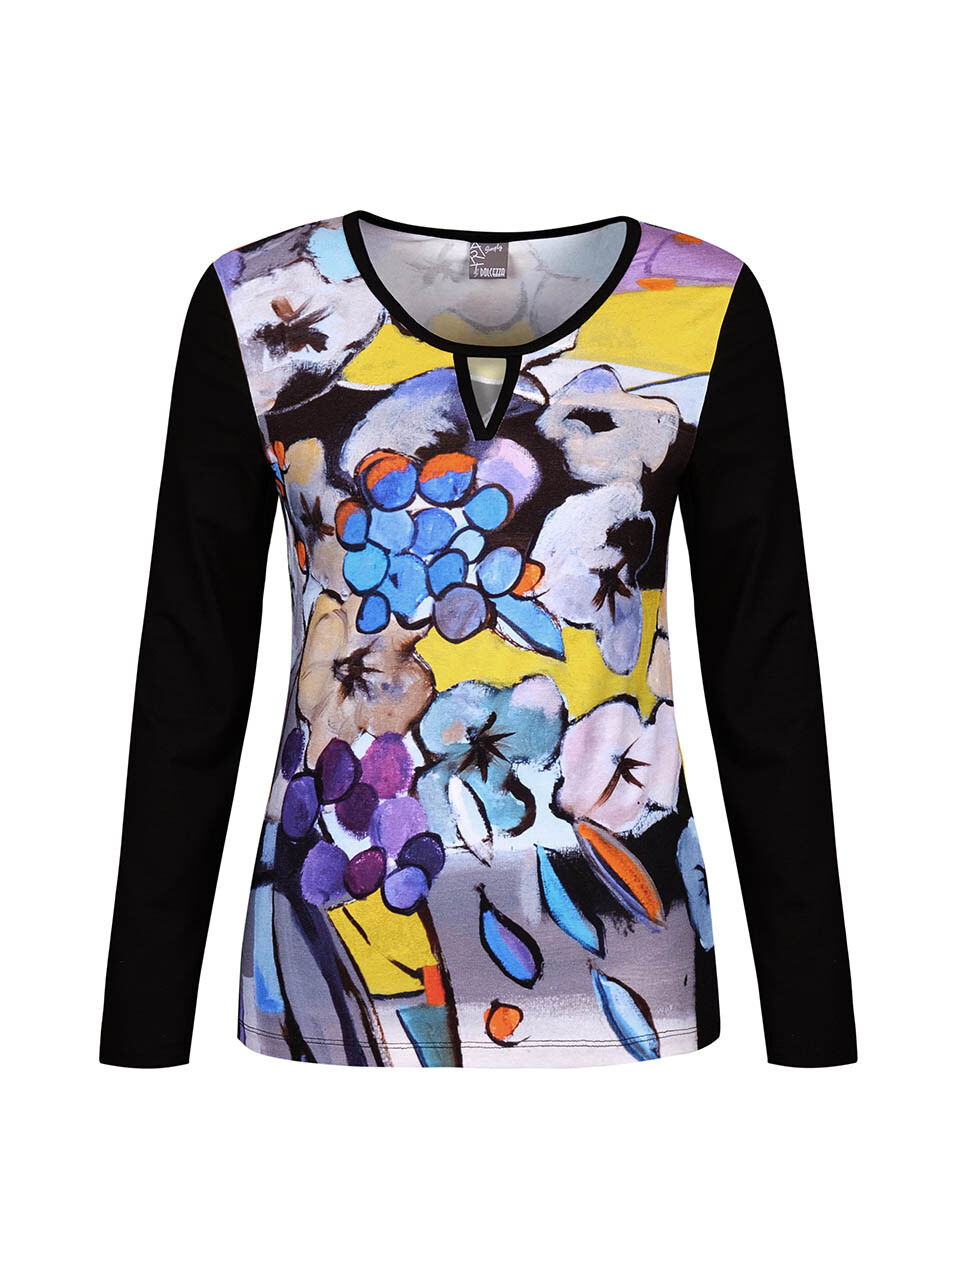 Simply Art Dolcezza: Still Life Keyhole Abstract Art Top (2 Left!)